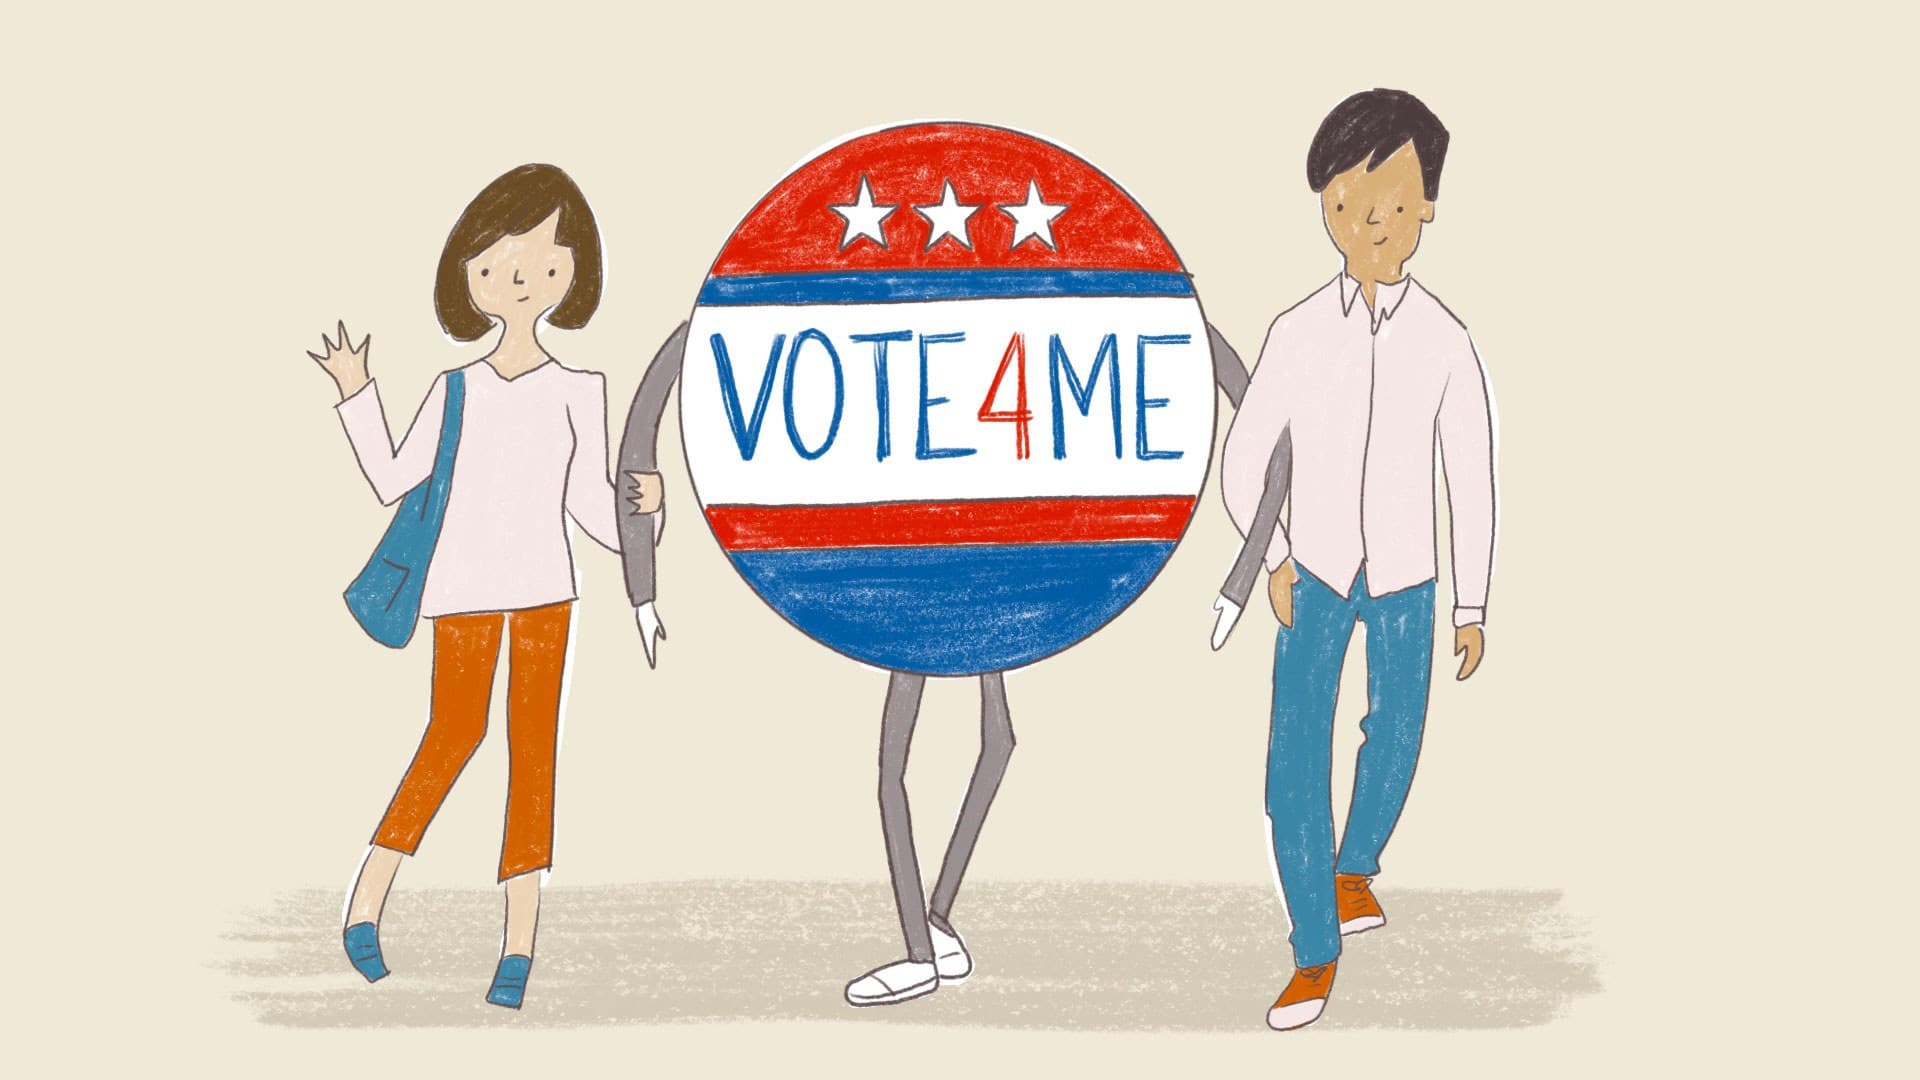 Two people link arms with "VOTE 4 ME" button